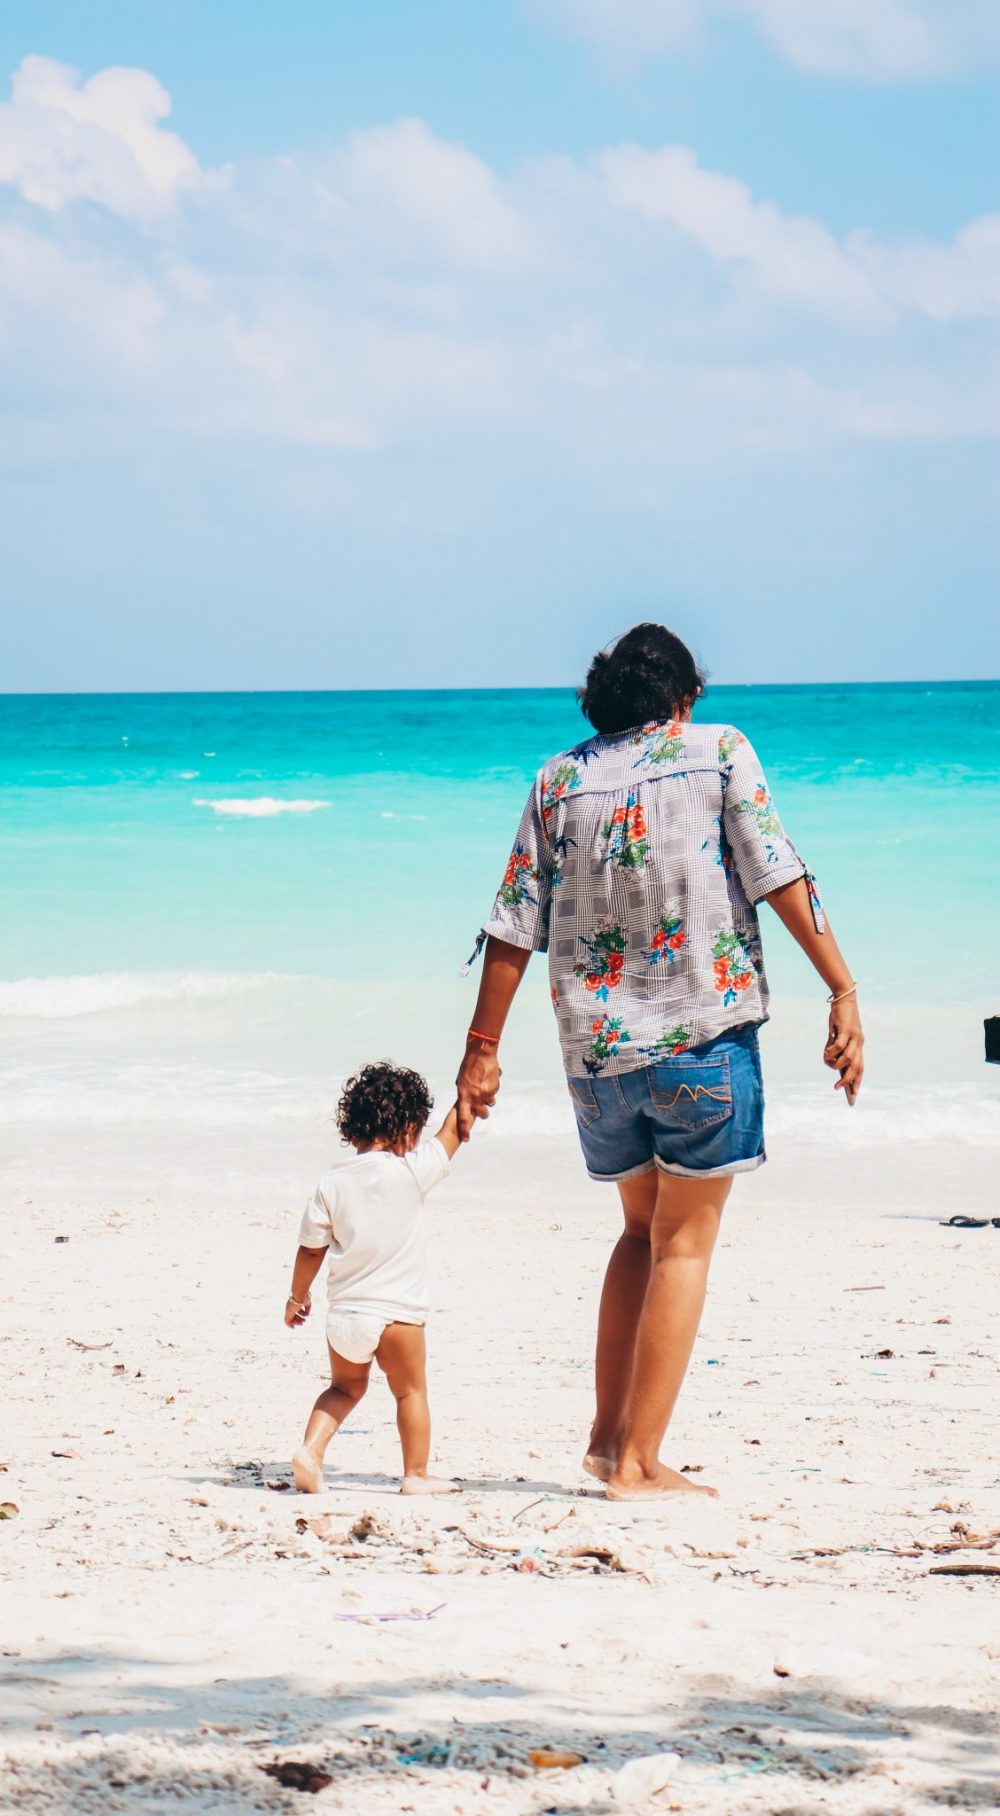 Top family Friendly Vacation Ideas for Baby’s First Vacation